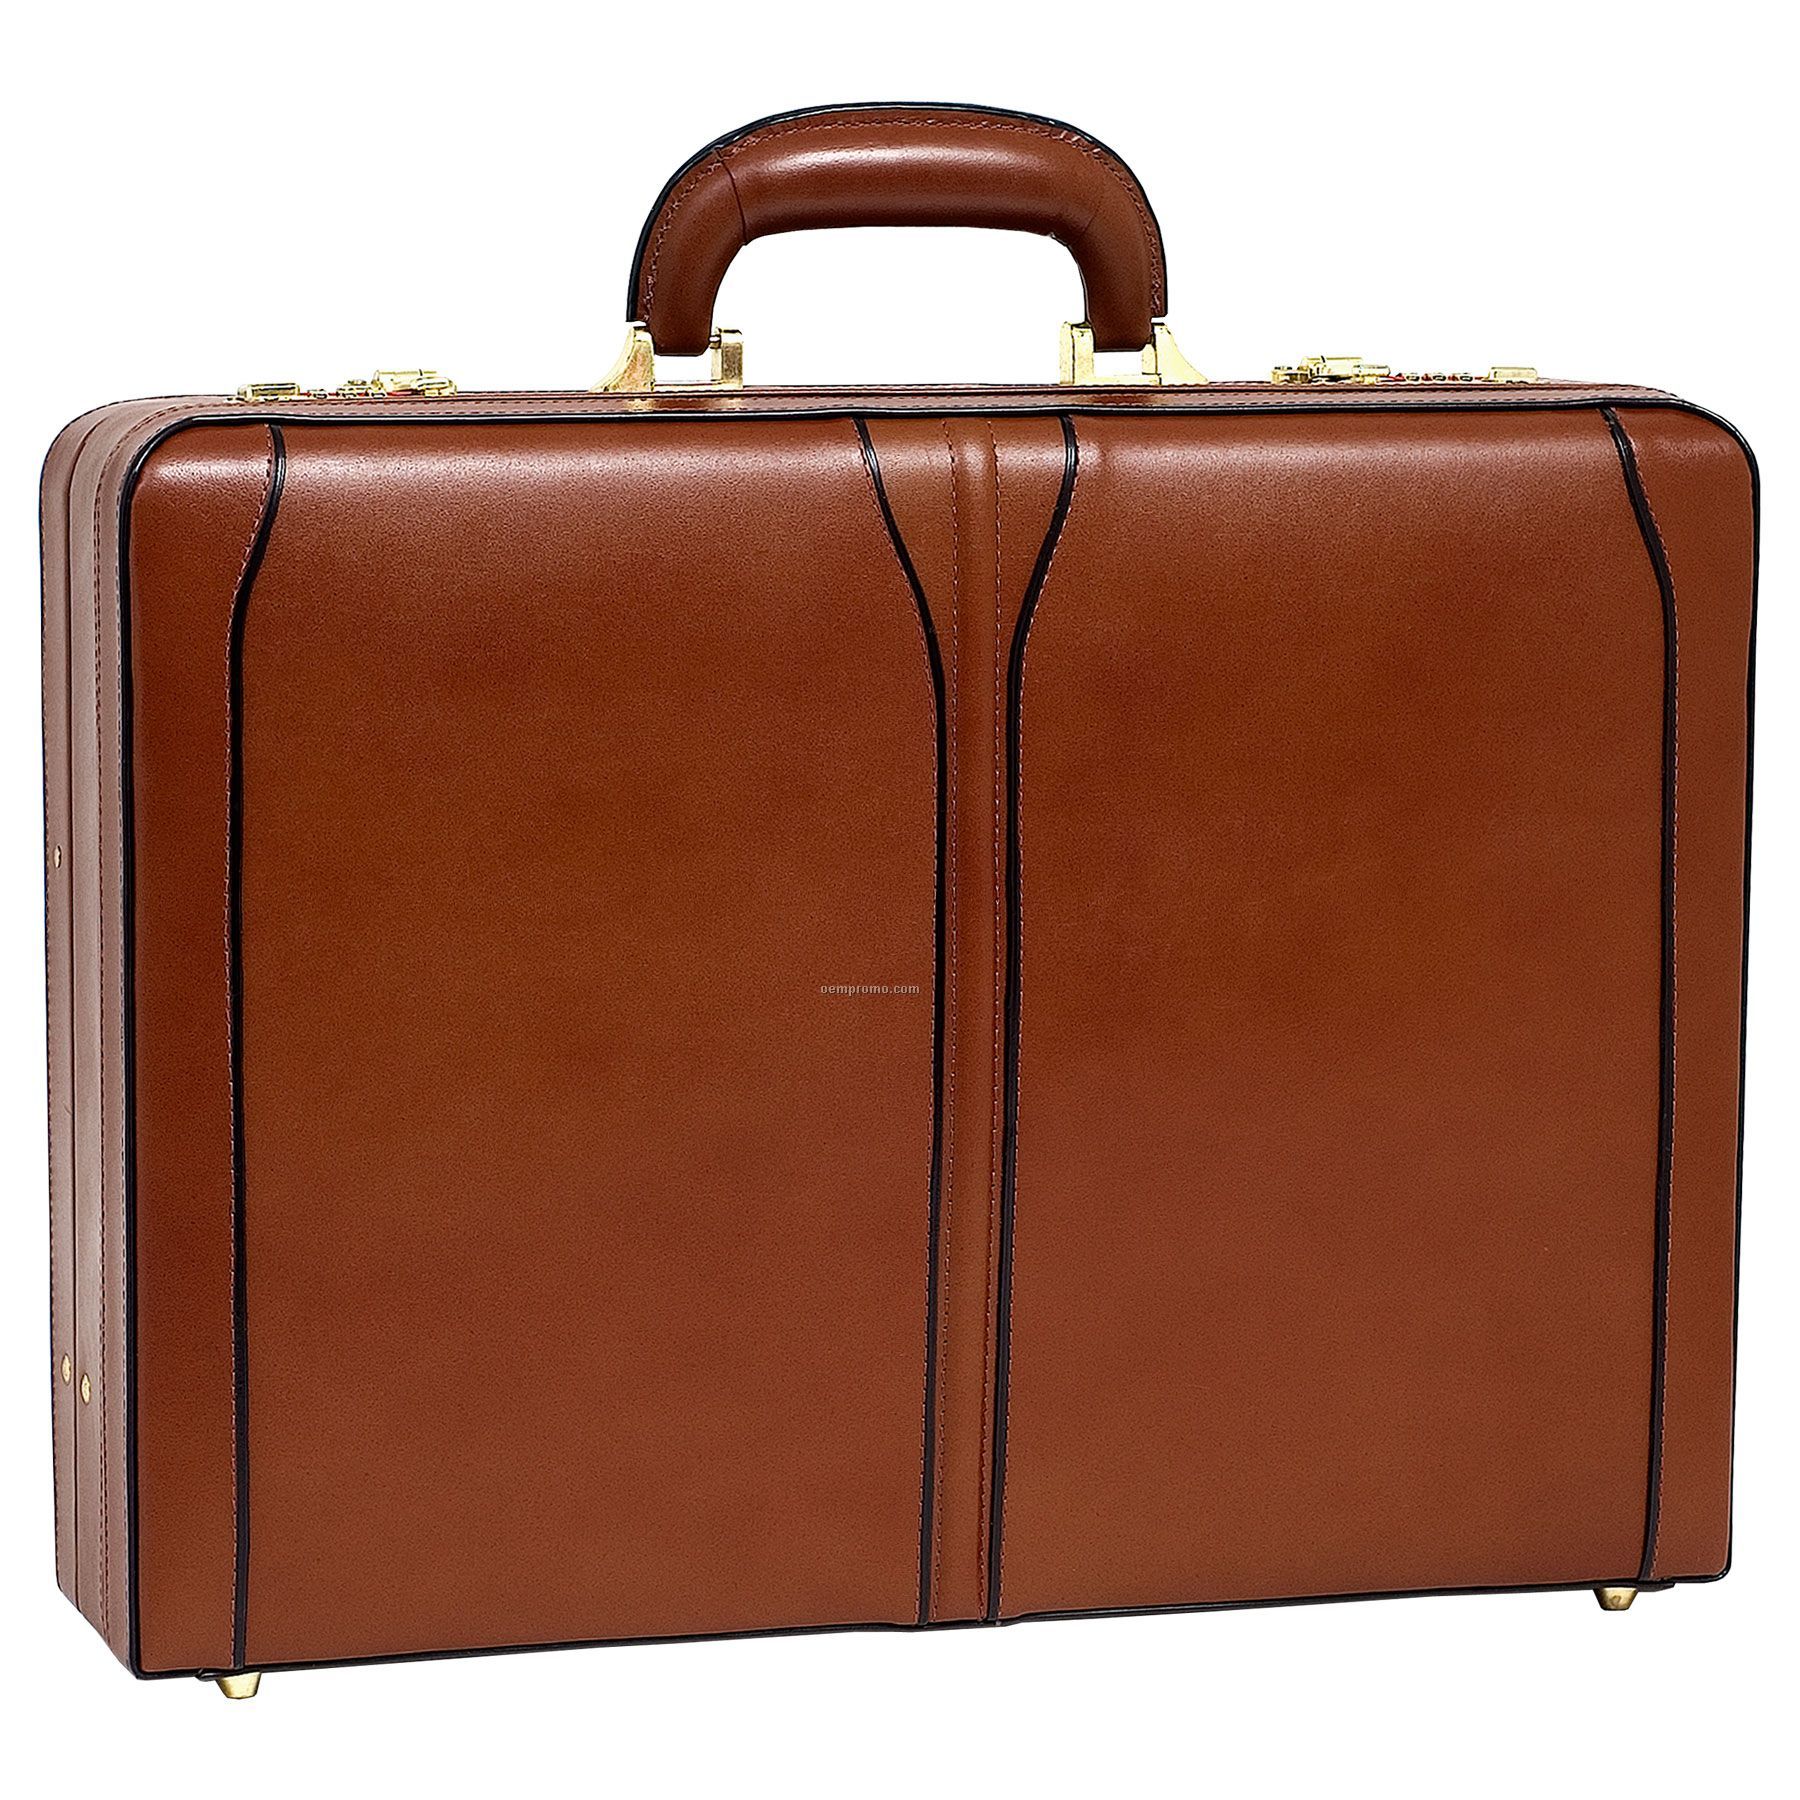 Turner Leather Expandable Attache Case - Brown